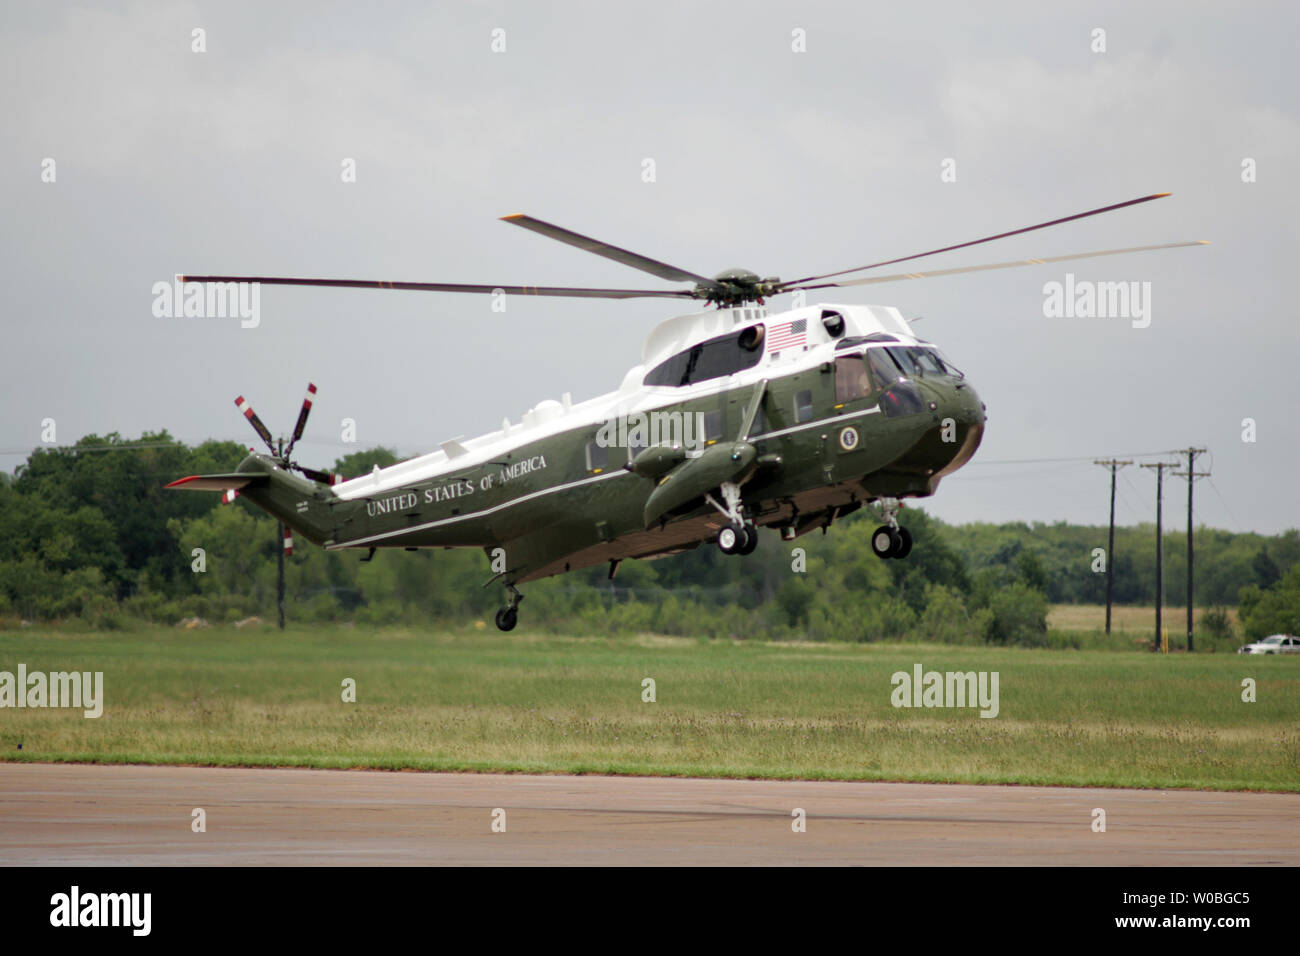 U.S. President George W. Bush, First Lady Laura Bush and their daughter Jenna Bush arrive on Marine One in Waco, Texas on June 17, 2007. The Bush family spent the Fathers Day weekend at his ranch in Crawford, Texas and will travel back to Washington. (UPI Photo/Ron Russek II) Stock Photo